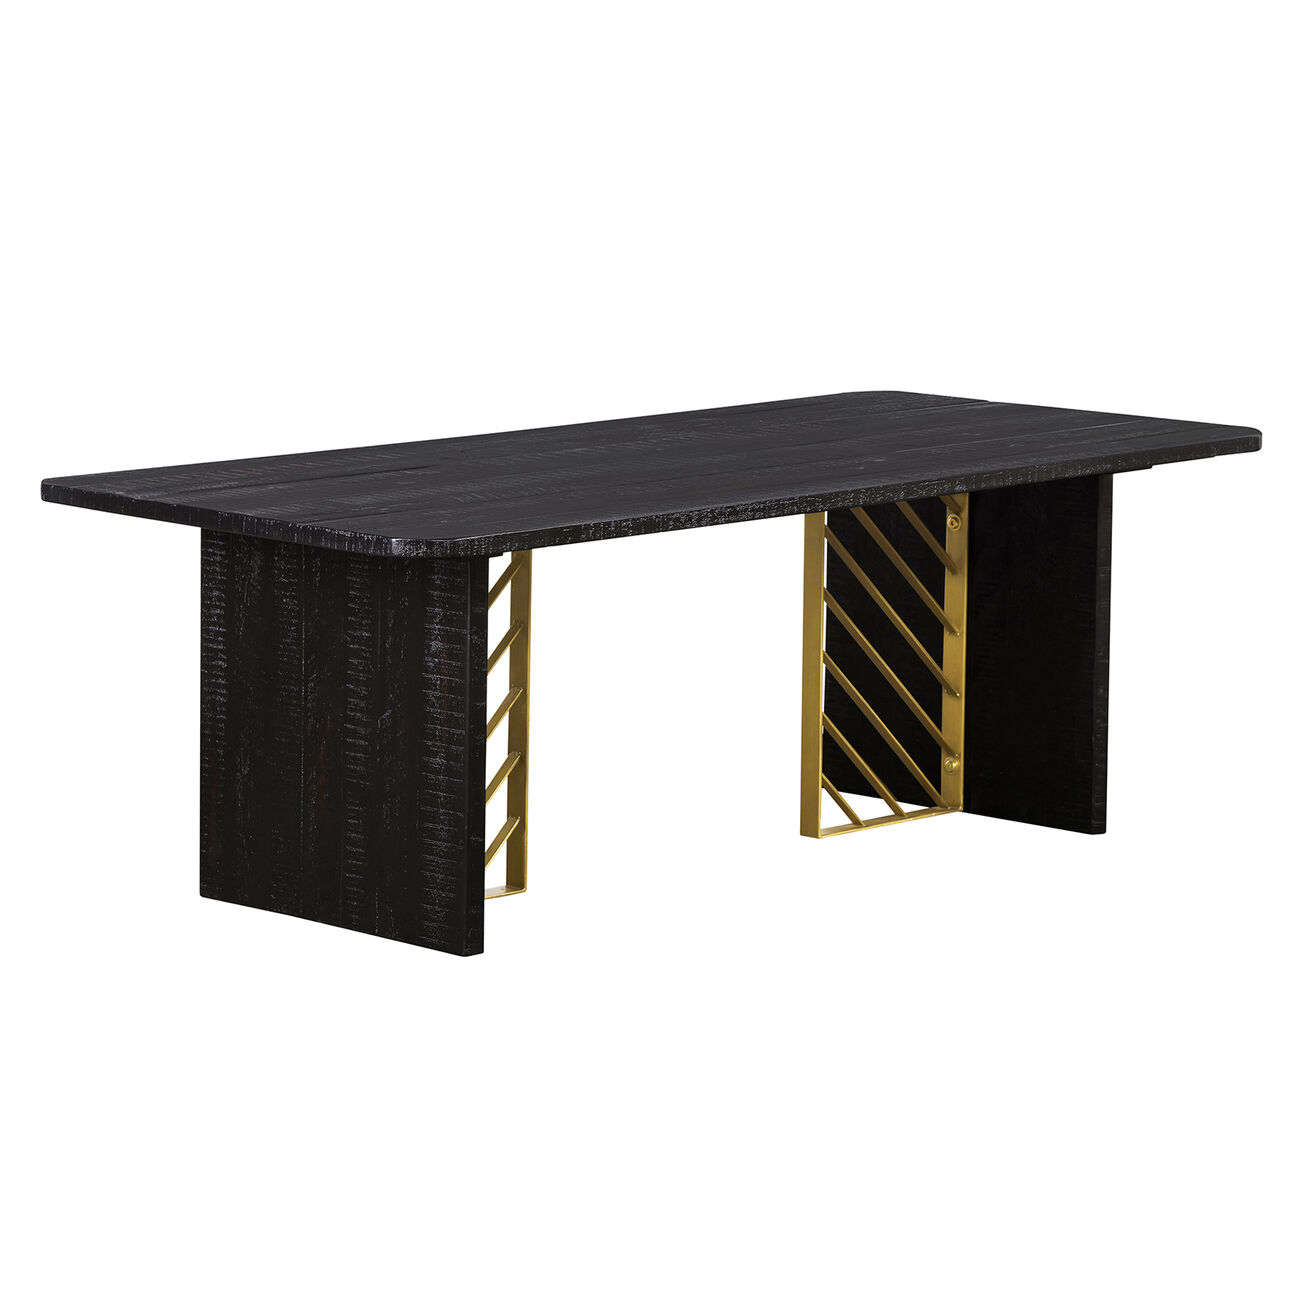 Wooden Coffee Table with Metal Accents, Gold and Black